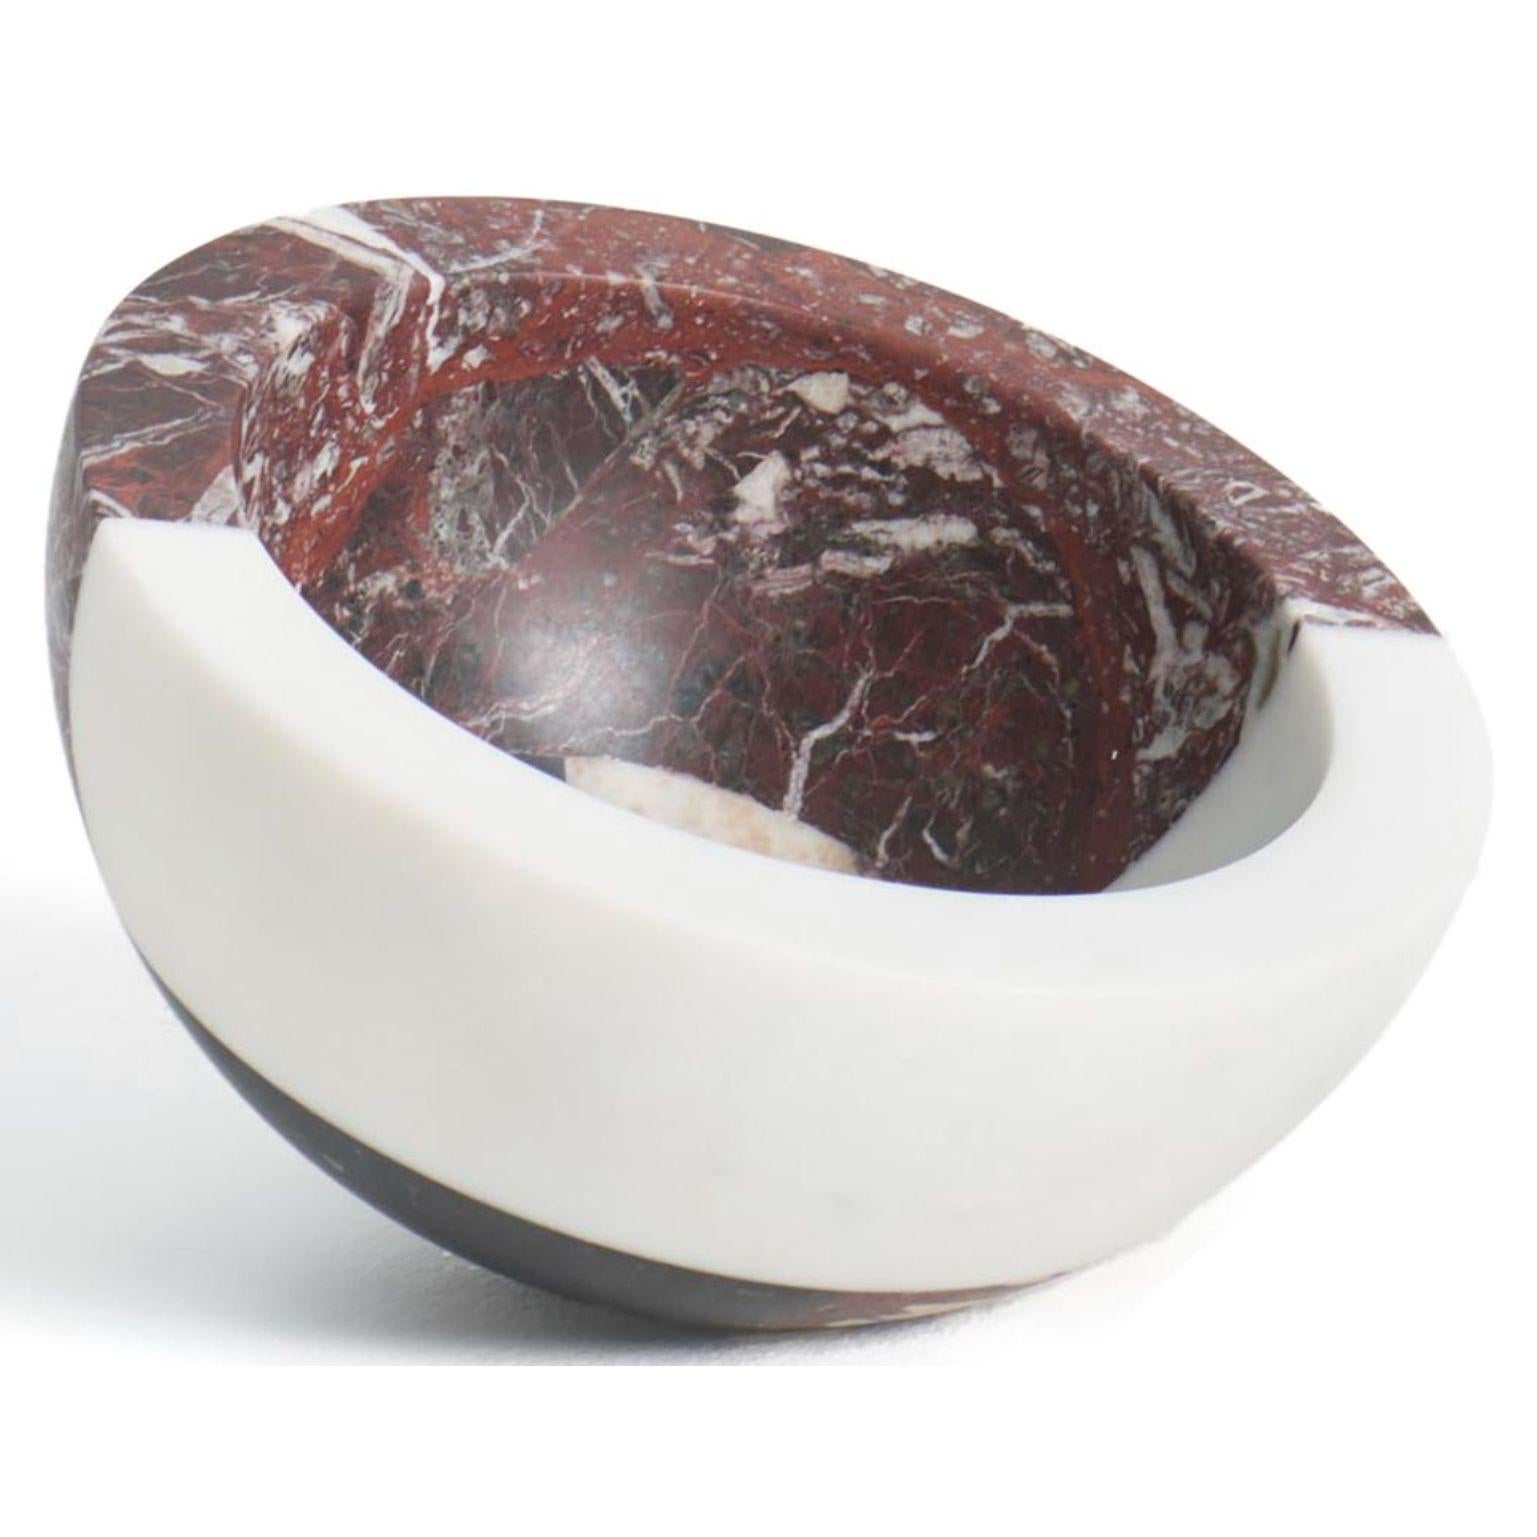 Gae large bowl by Arthur Arbesser
Masters Collection
Dimensions: 22 x 12.7 cm
Materials: Nero Marquinia, Arabescato Vagli Filo Rosso, Bianco Michelangelo, Rosso Levanto

The history of design – often a synonym for project or plan – guides us